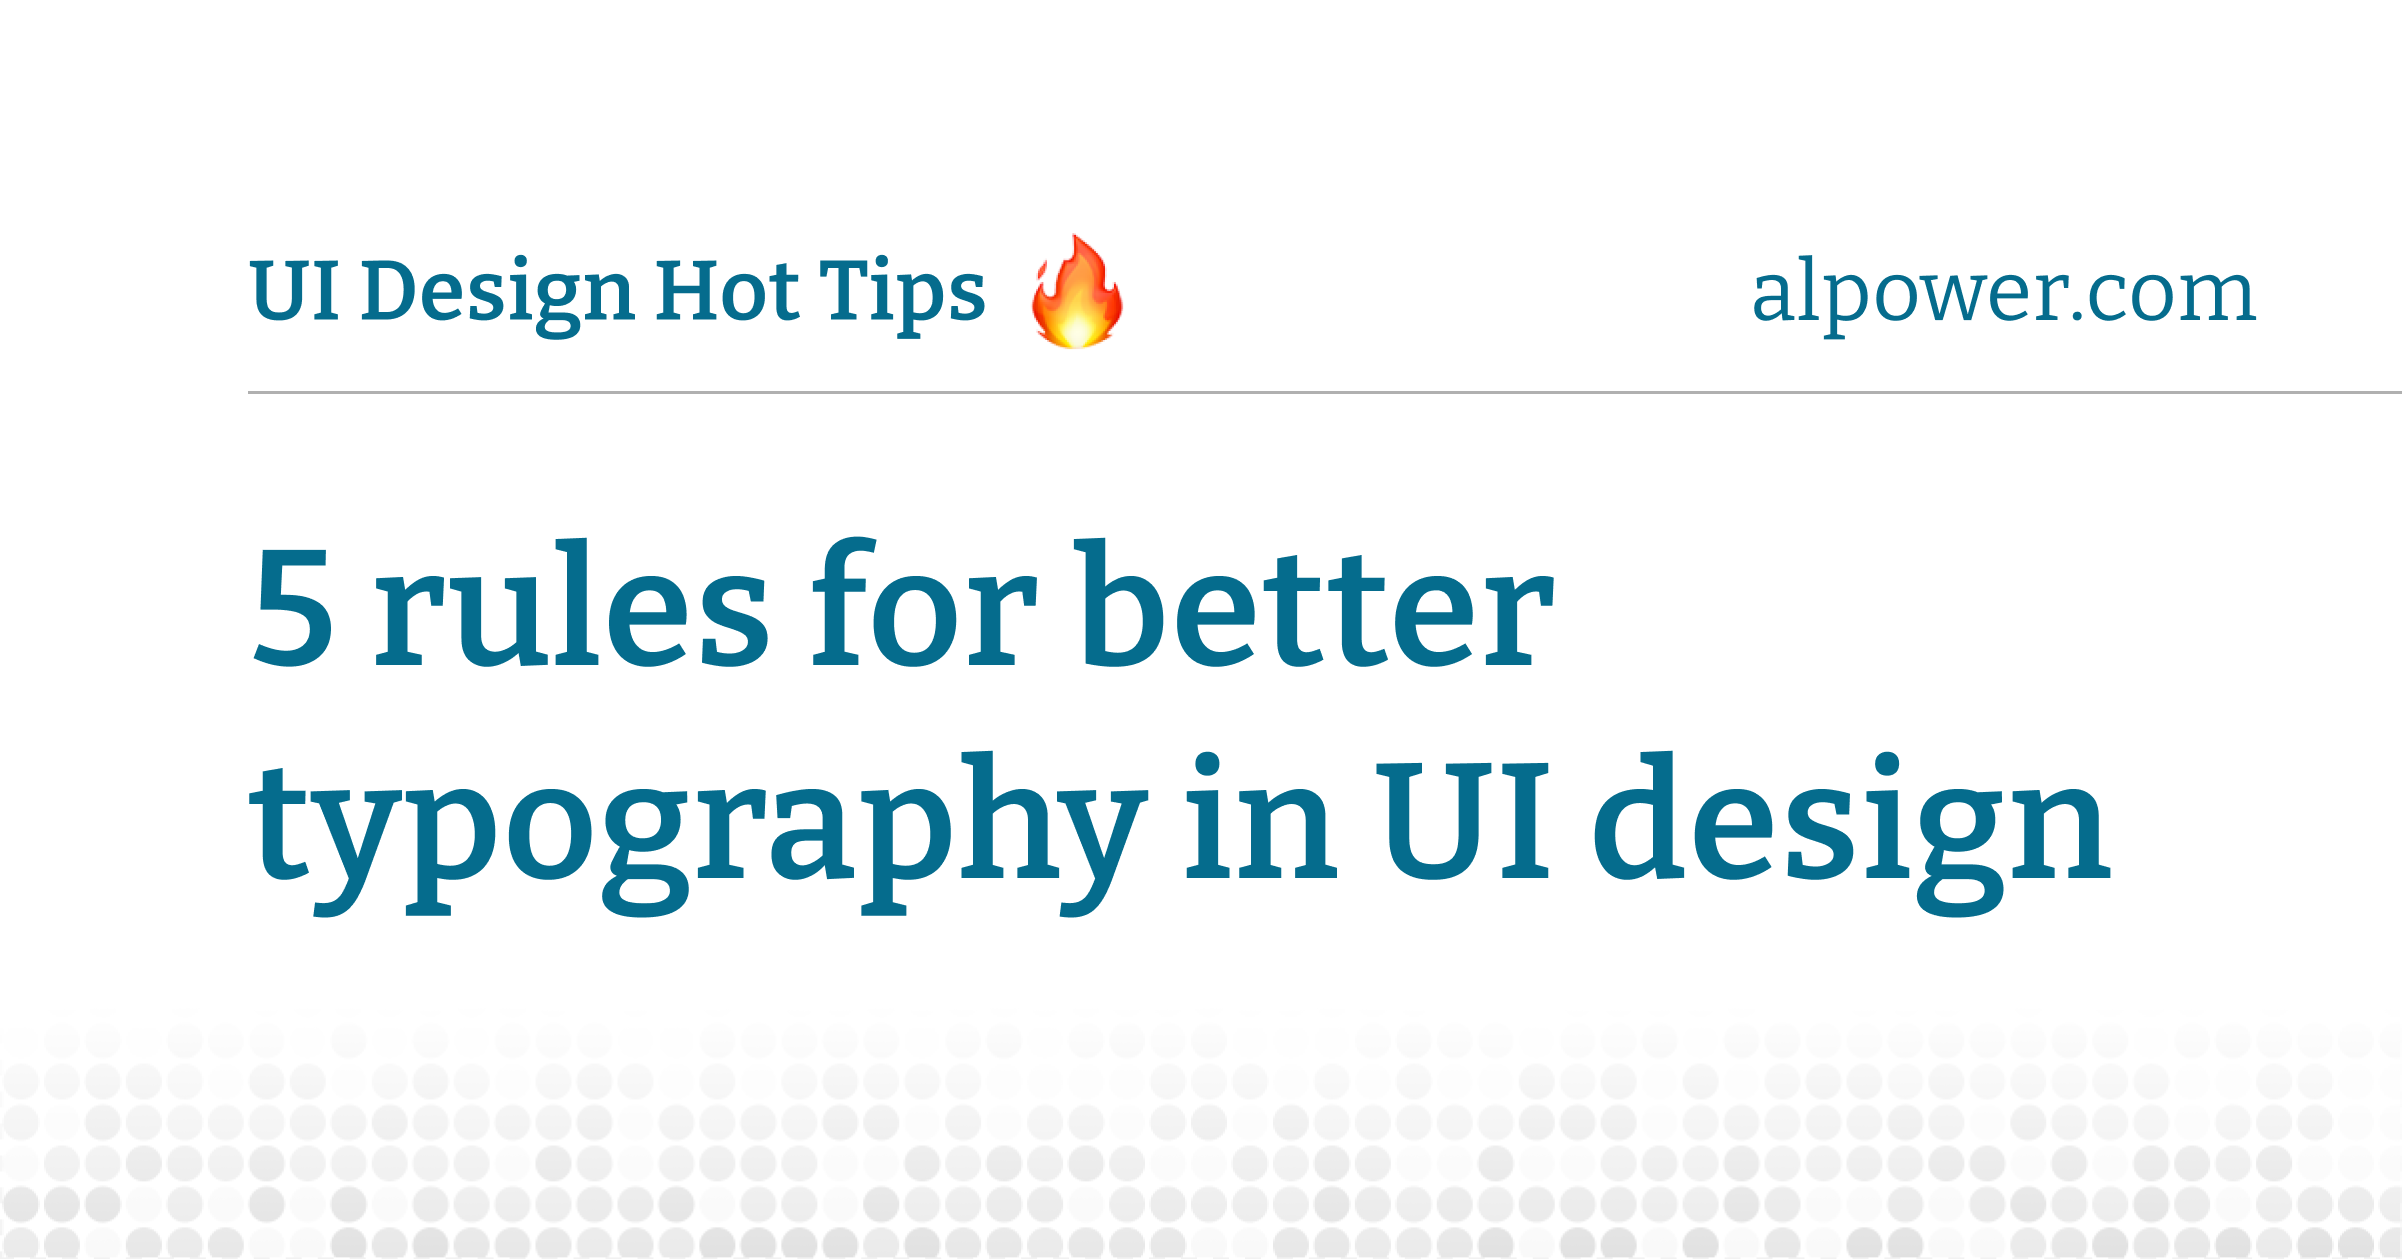 5 rules for better typography in UI design